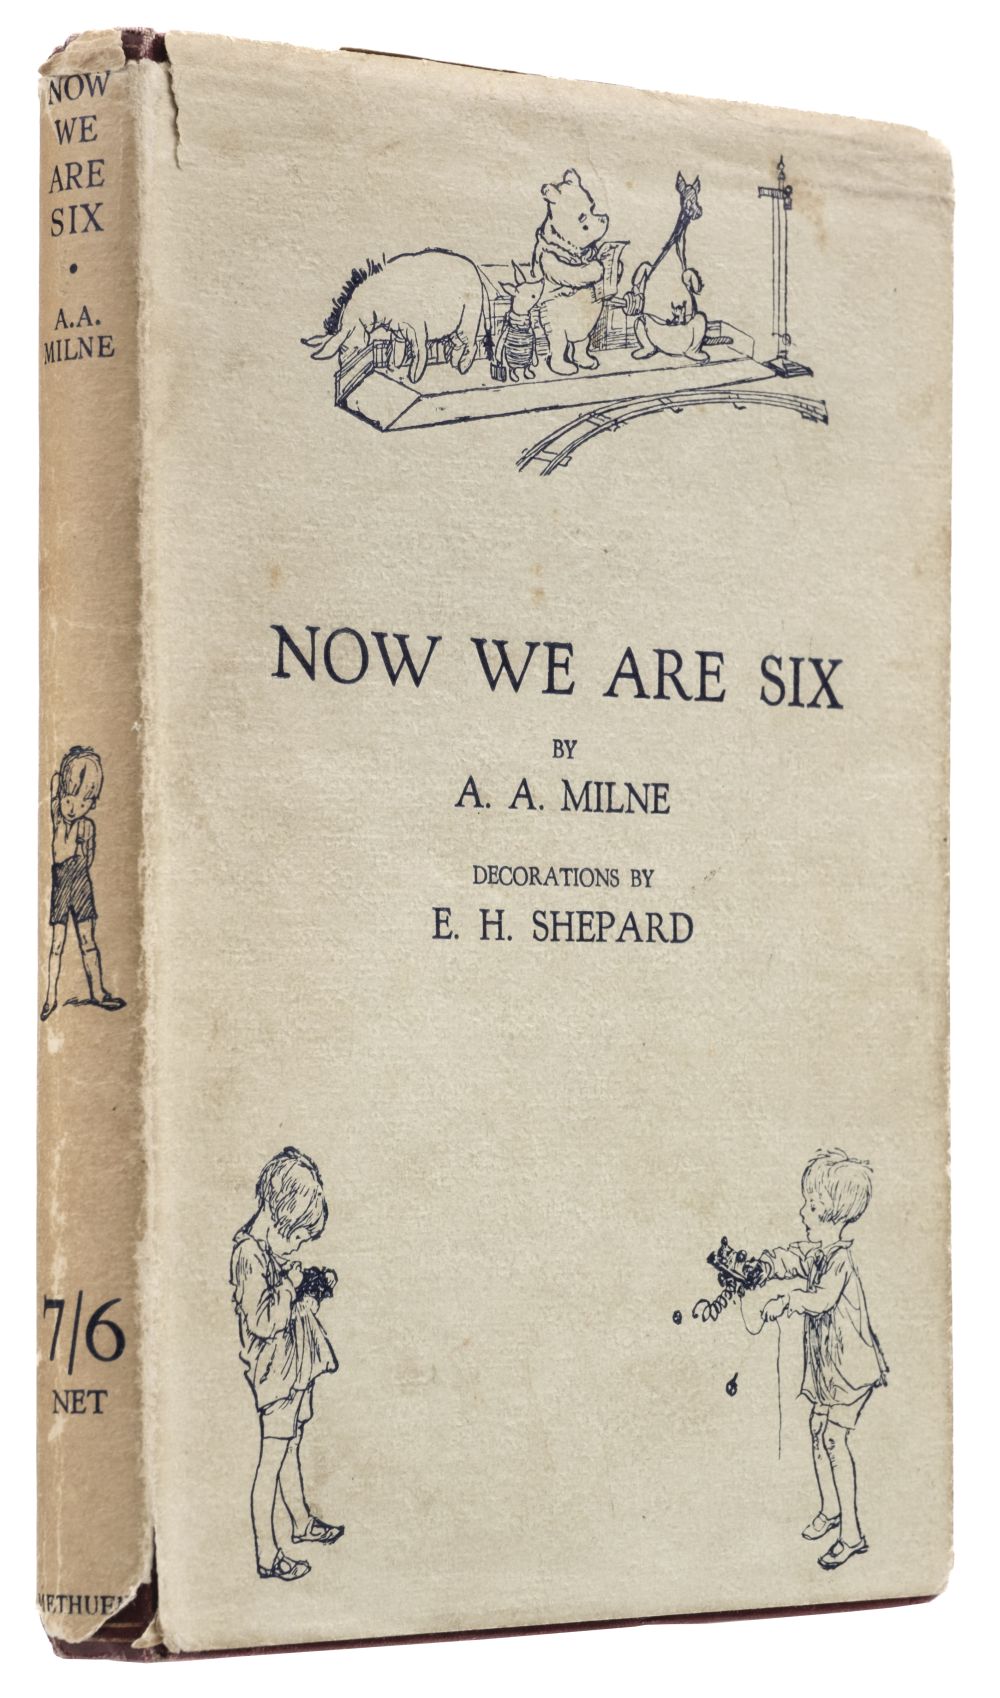 Milne (A. A.). Now We Are Six, with Decorations by Ernest H. Shepard, 1st edition, 1927